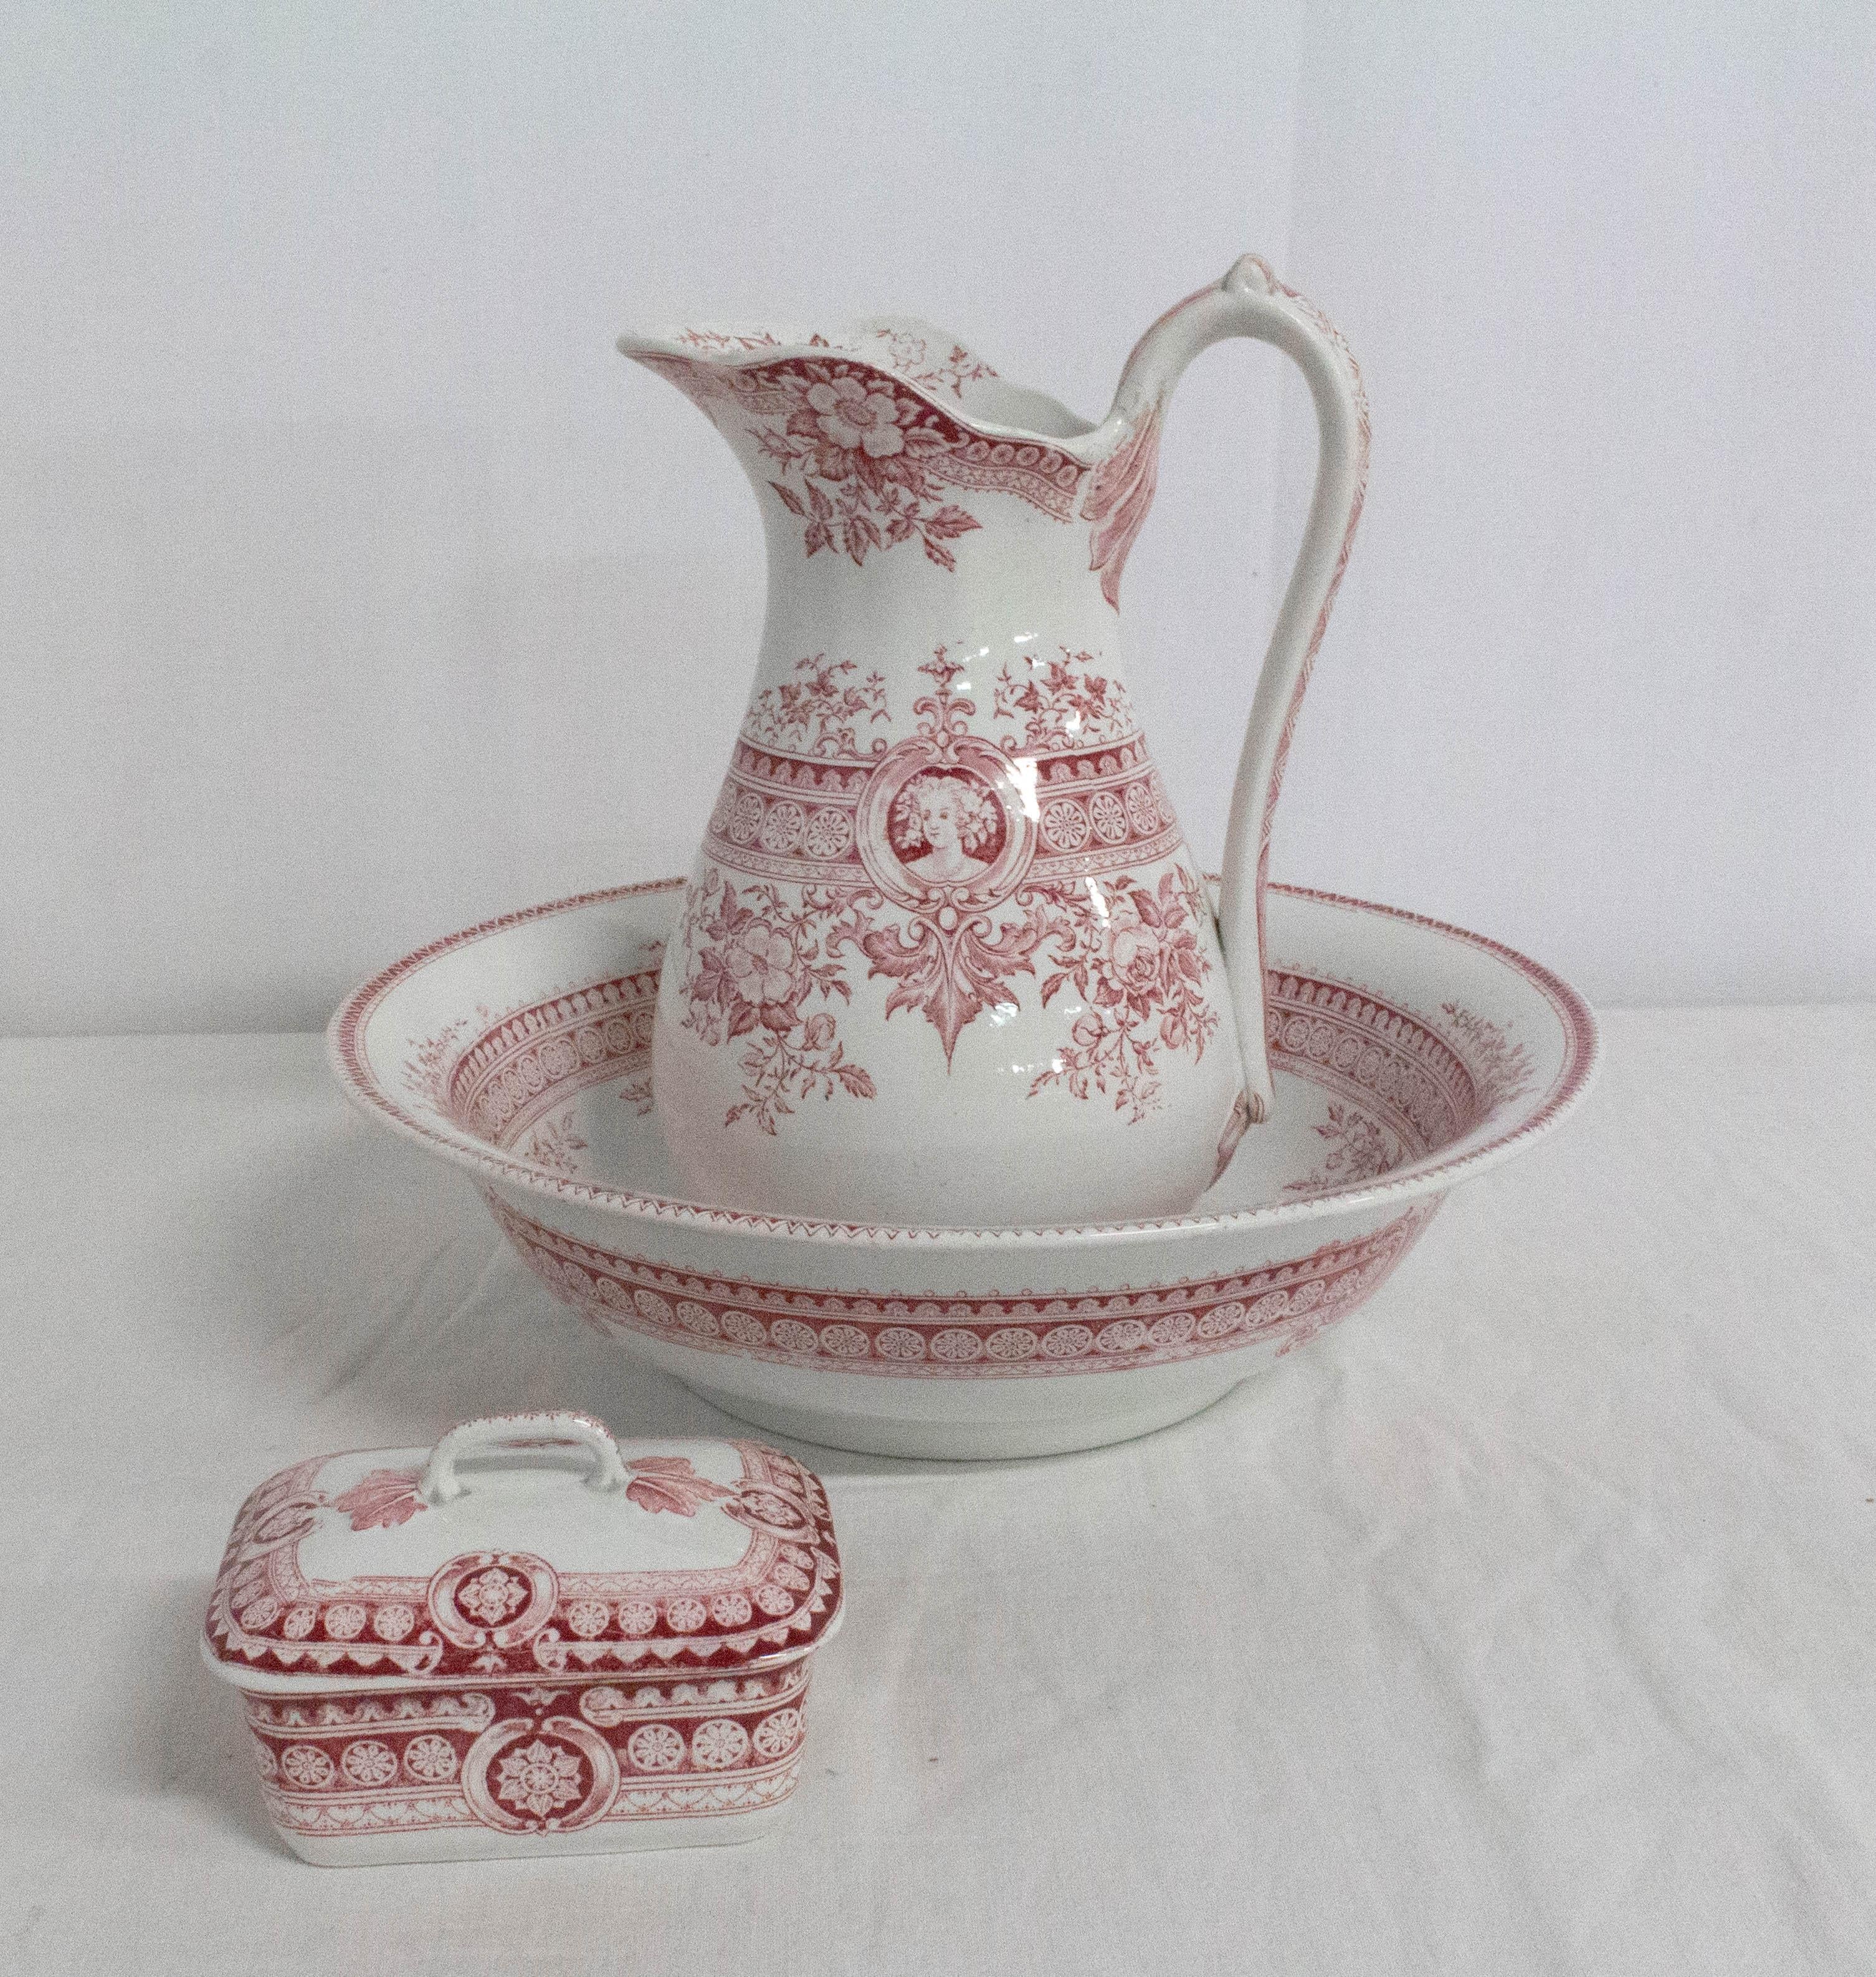 Sarreguemines set: wash bowl, pitcher and soap dish, Parisia Model, circa 1850.
Dimensions:
Wash bowl: diameter 13.38 in., height 3.94 in.
Pitcher: diameter 6.70 in., height 10.24 in.
Soap dish: D 3.54 in., W 4.72 in., H 3.15 in.
Very good